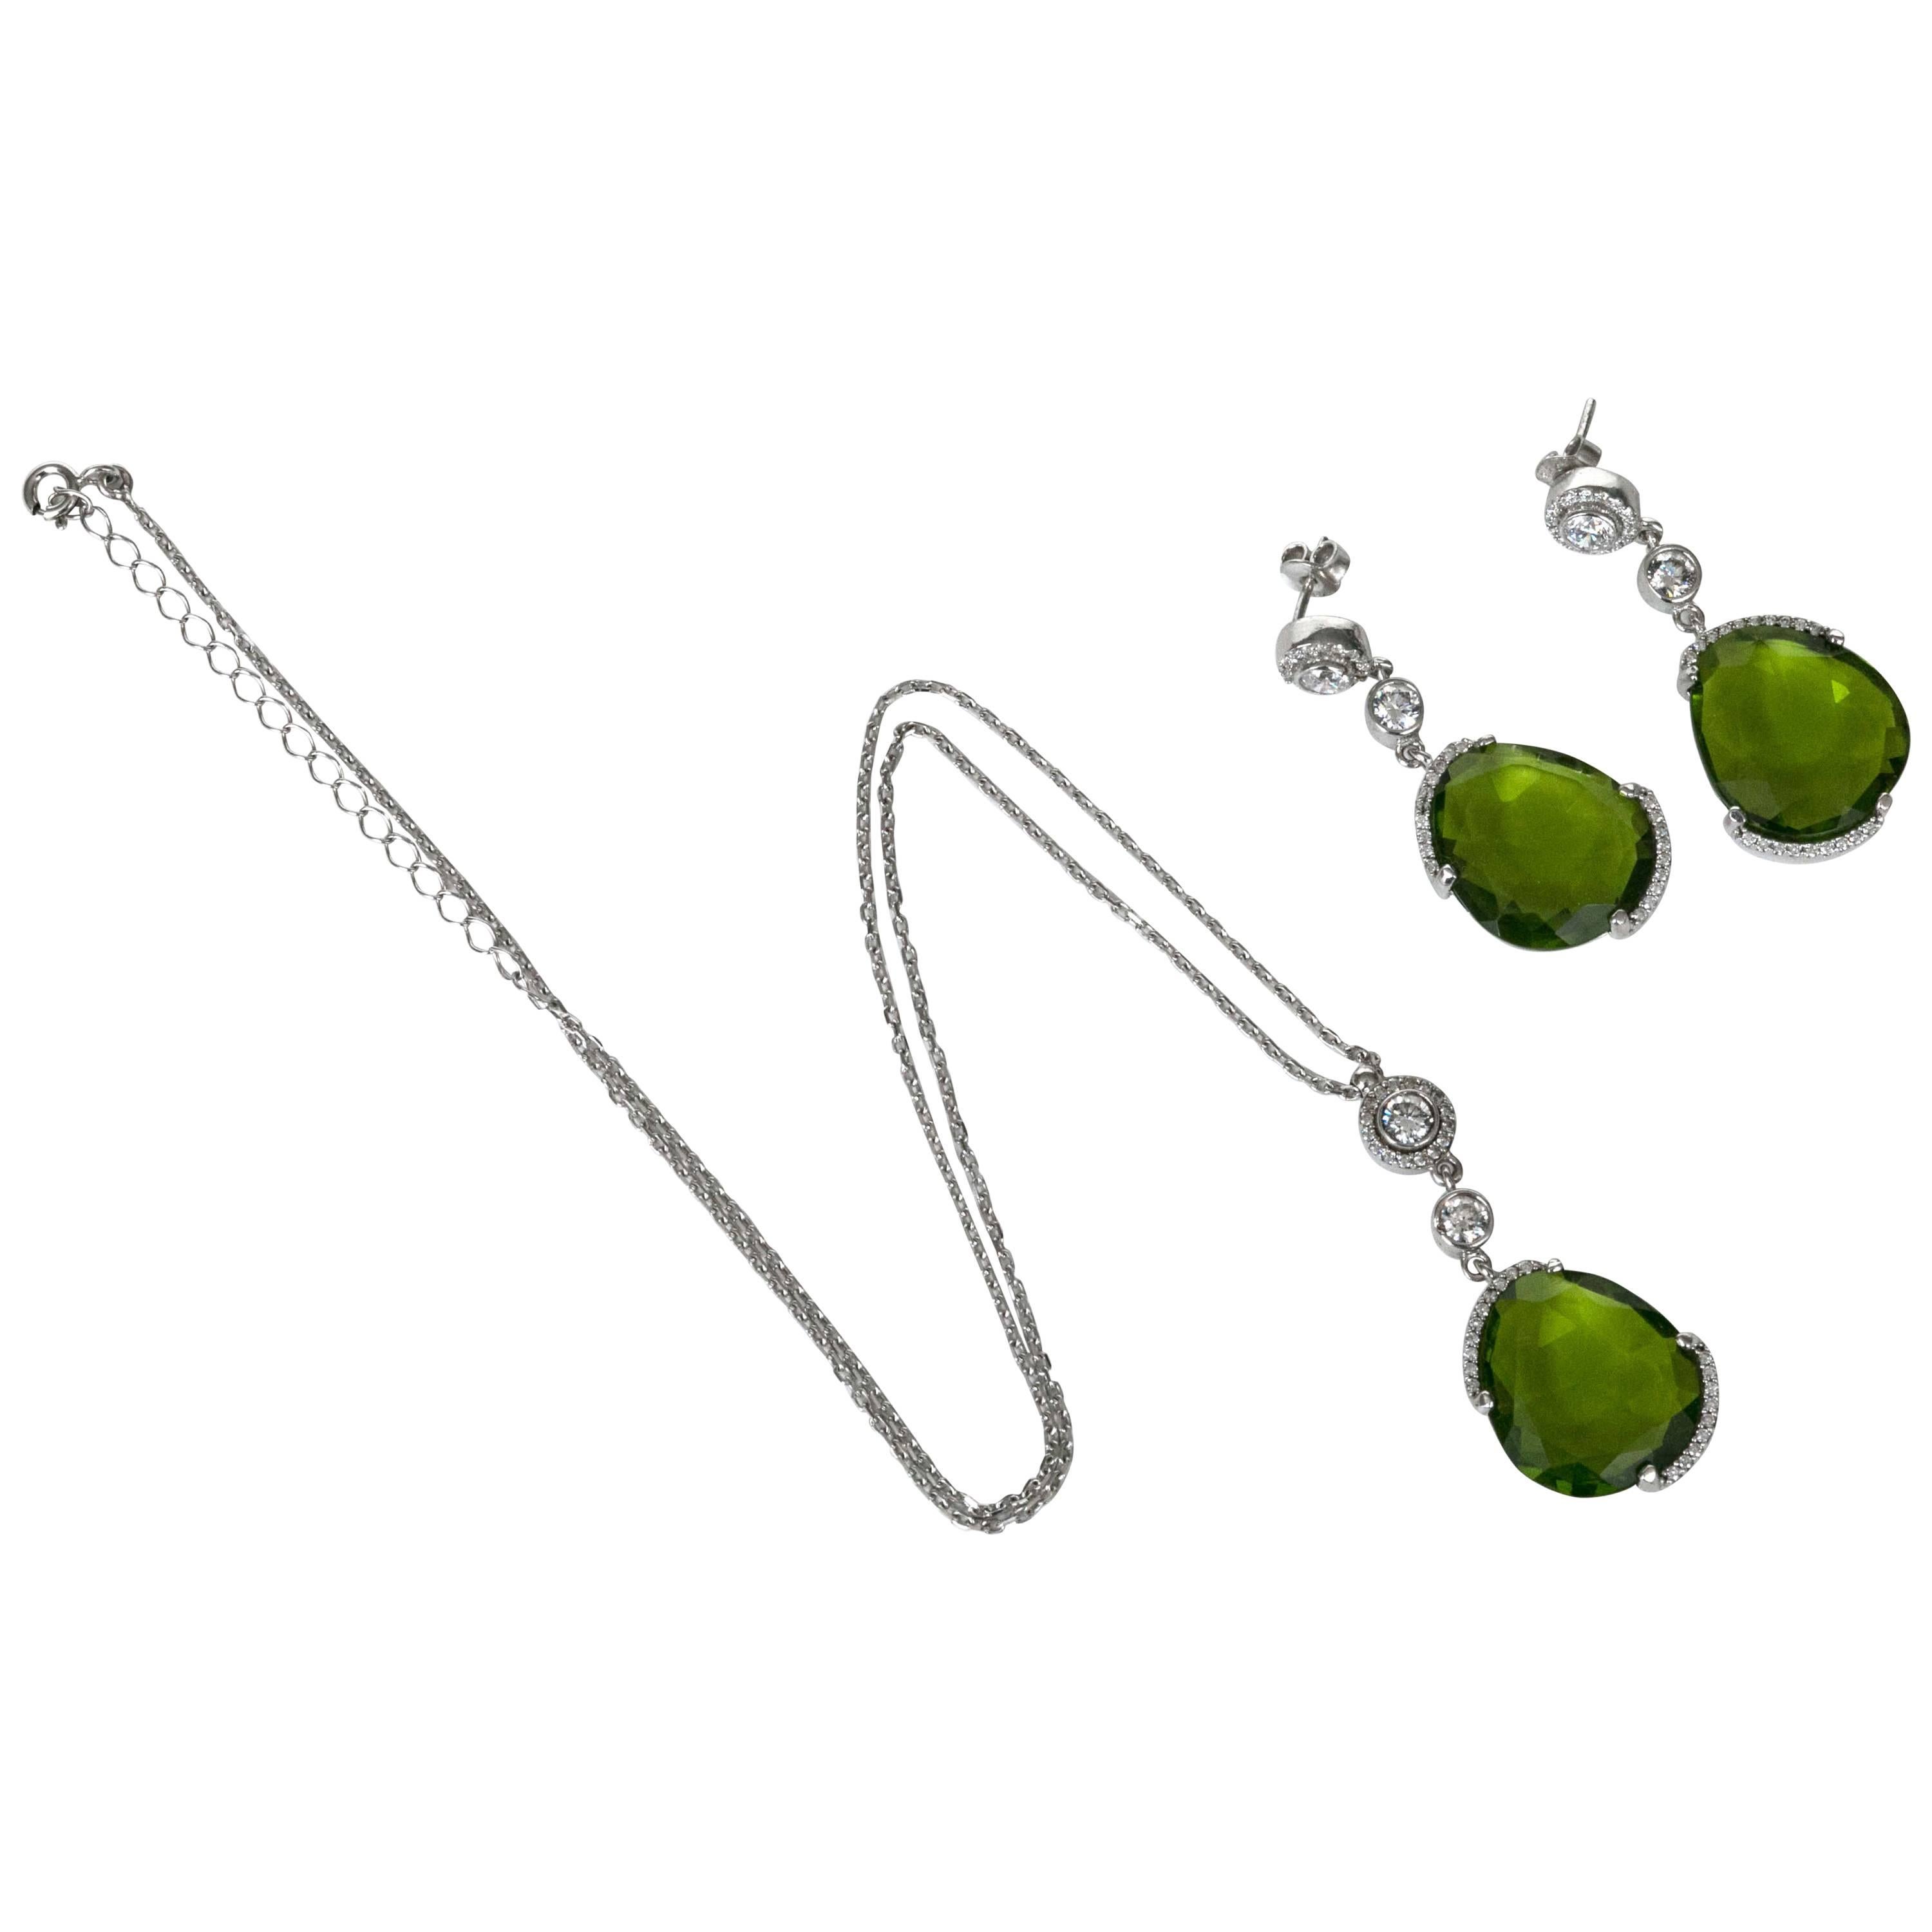 Beautiful Swarovski Crystal and Waterdrop Peridot Necklace and Earrings Set For Sale